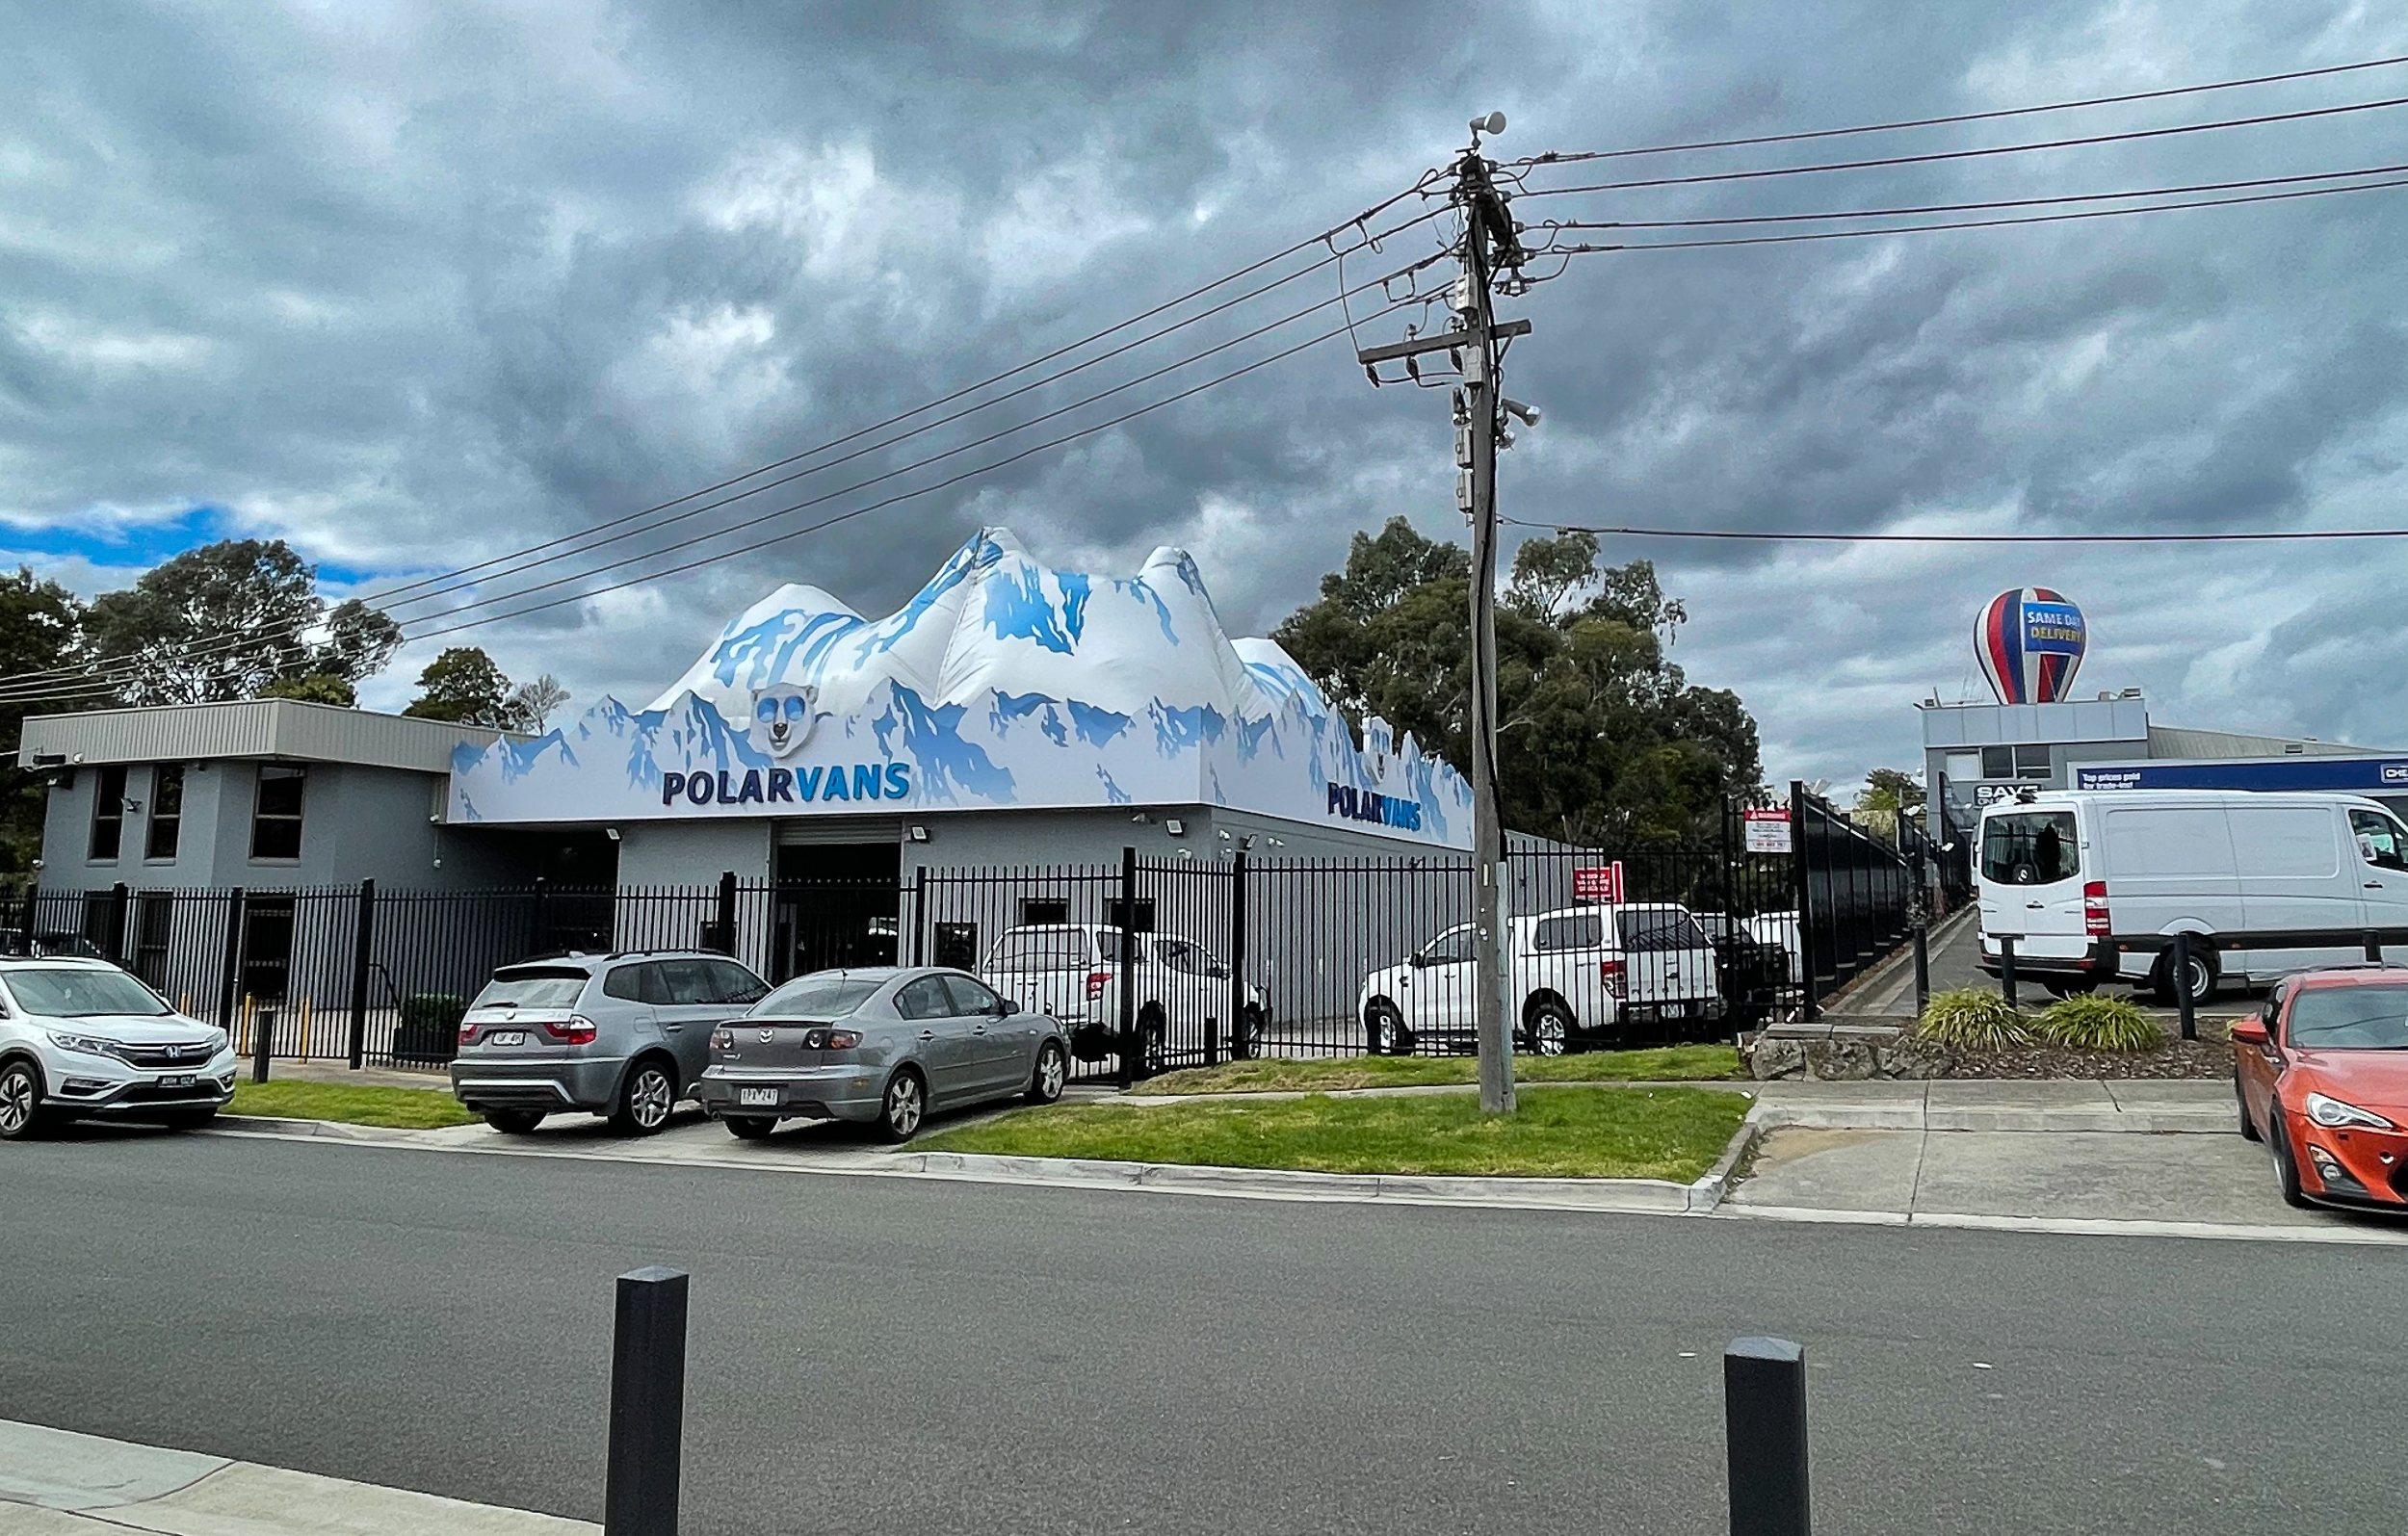 The promotional inflatable was designed to look like the snowy mountains of some polar environment; the mountains stand tall above the buildings and can be seen up to a kilometre away.